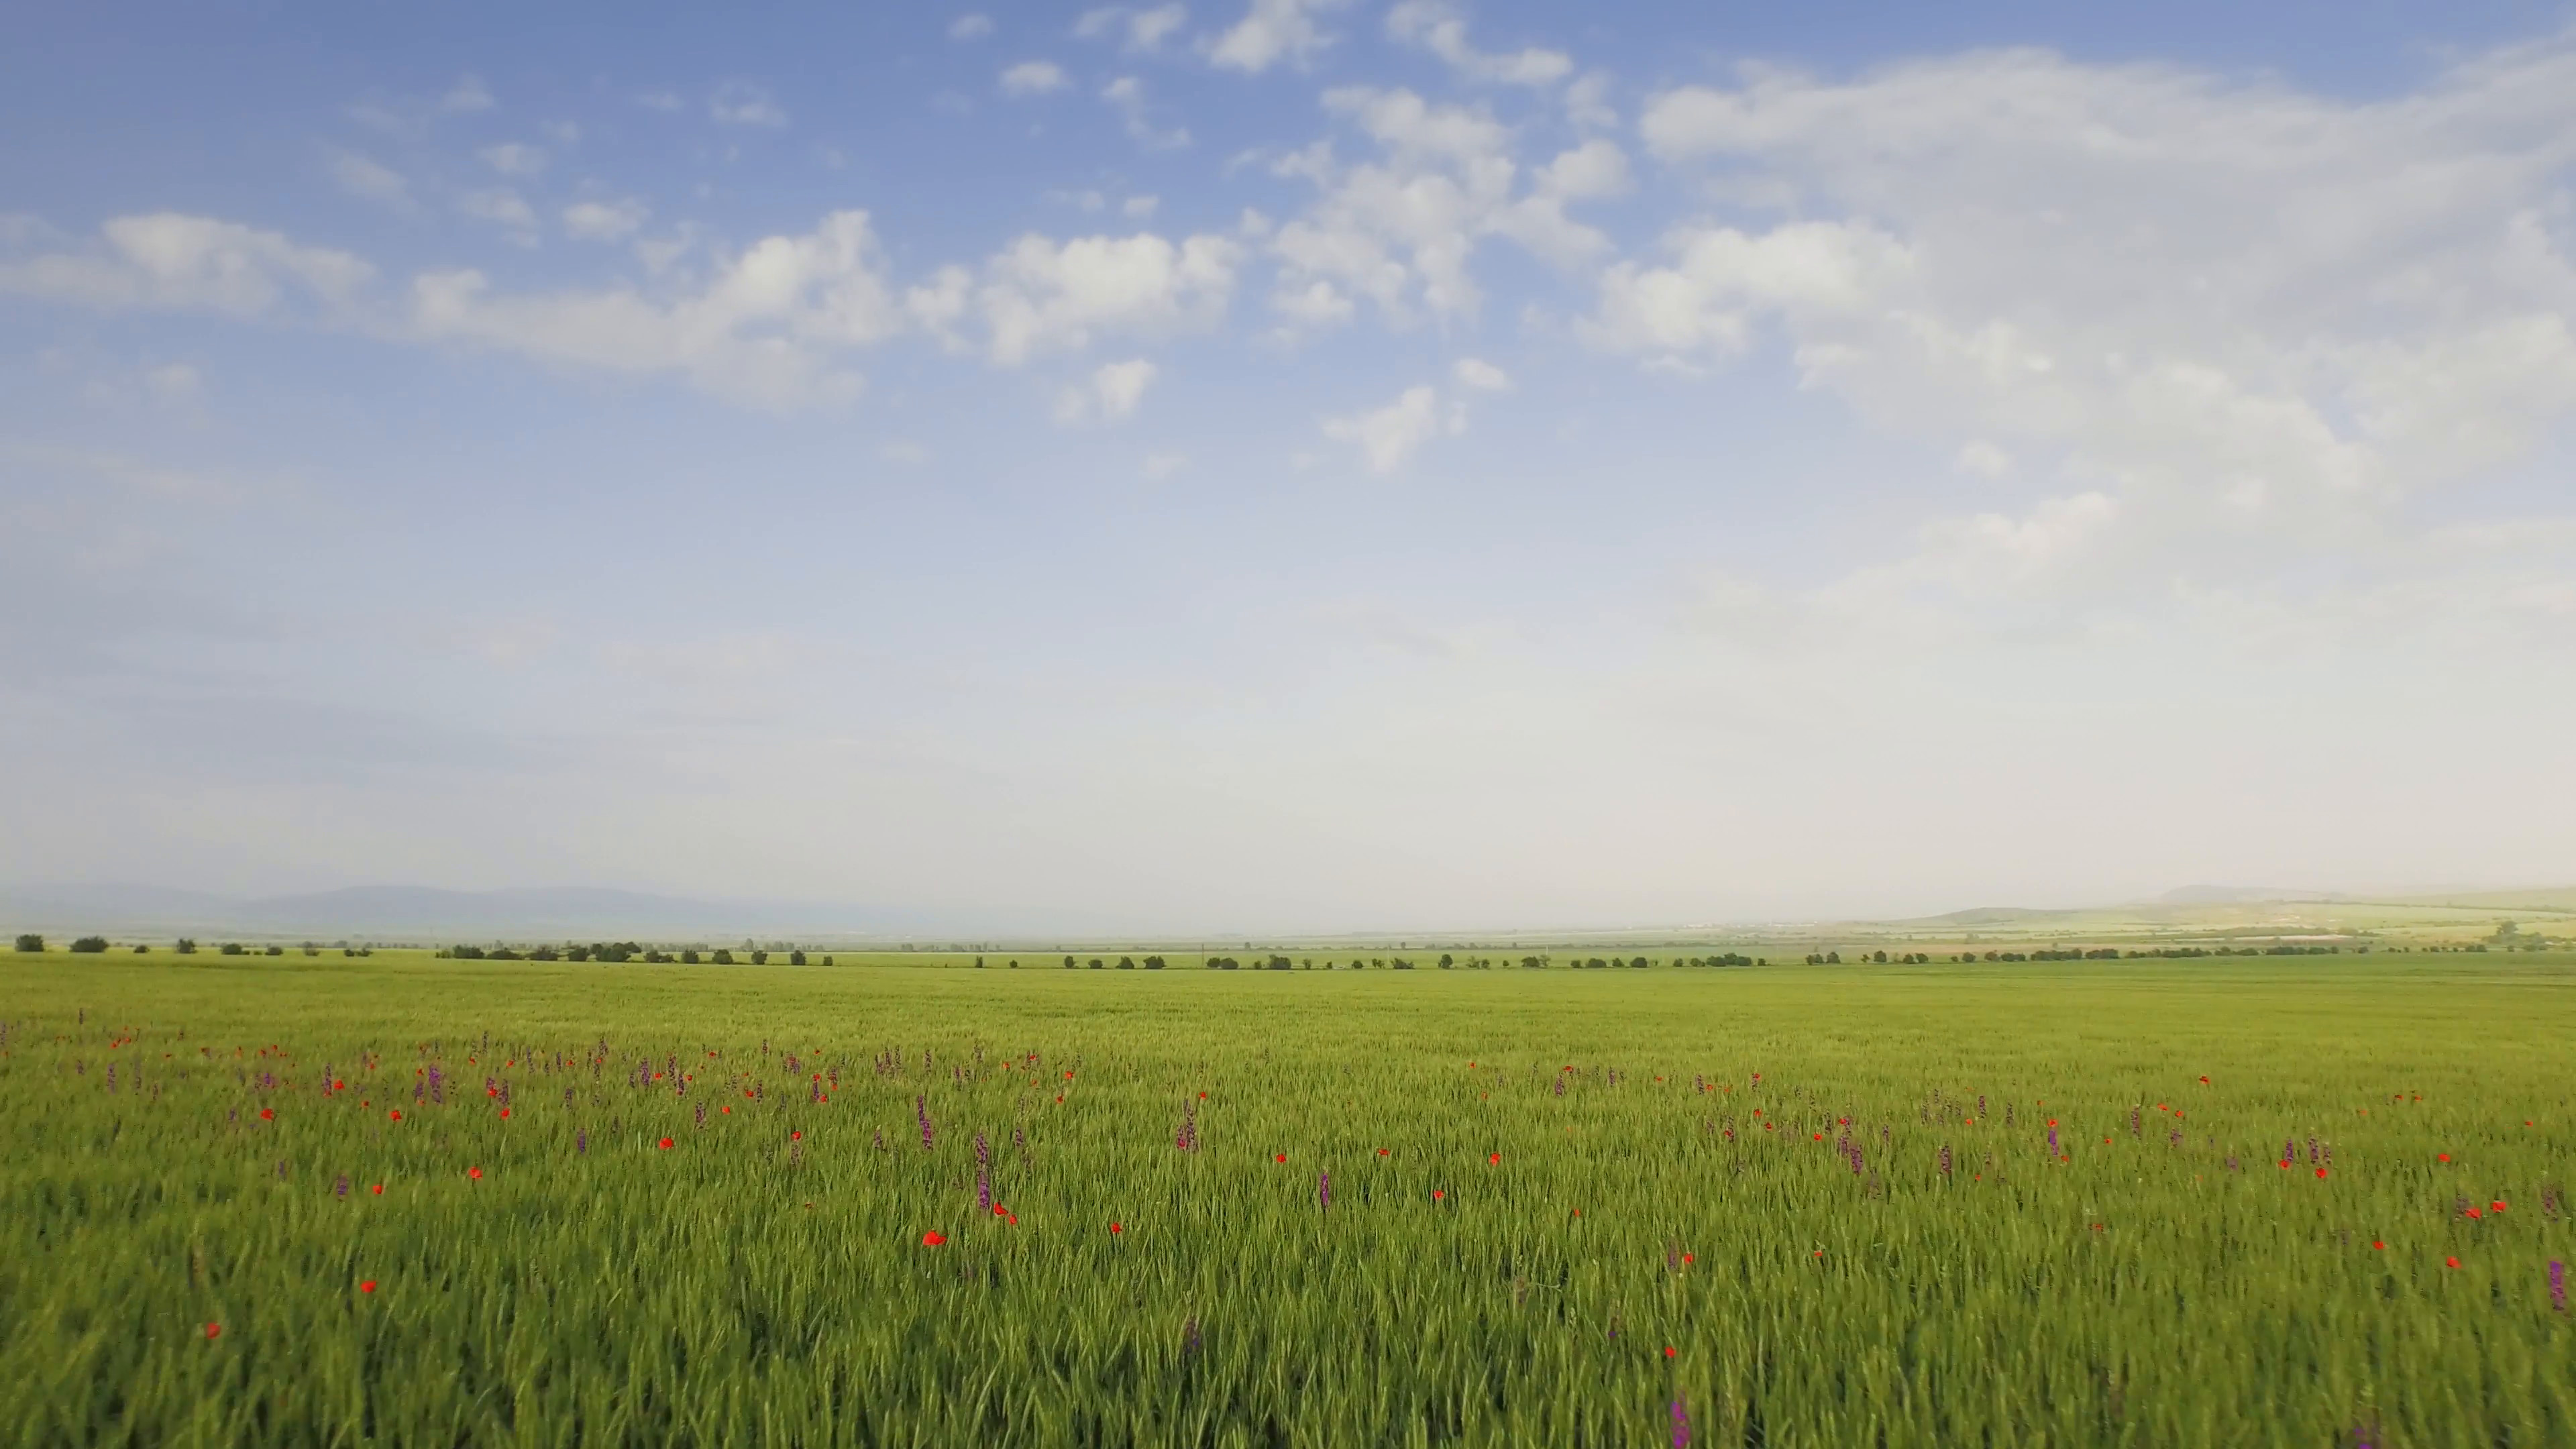 3840x2160 Subscription Library Wheat Field Nature Green Spring Agriculture Plant  Summer Landscape Grass Blue Sky Season Farm Rural Meadow